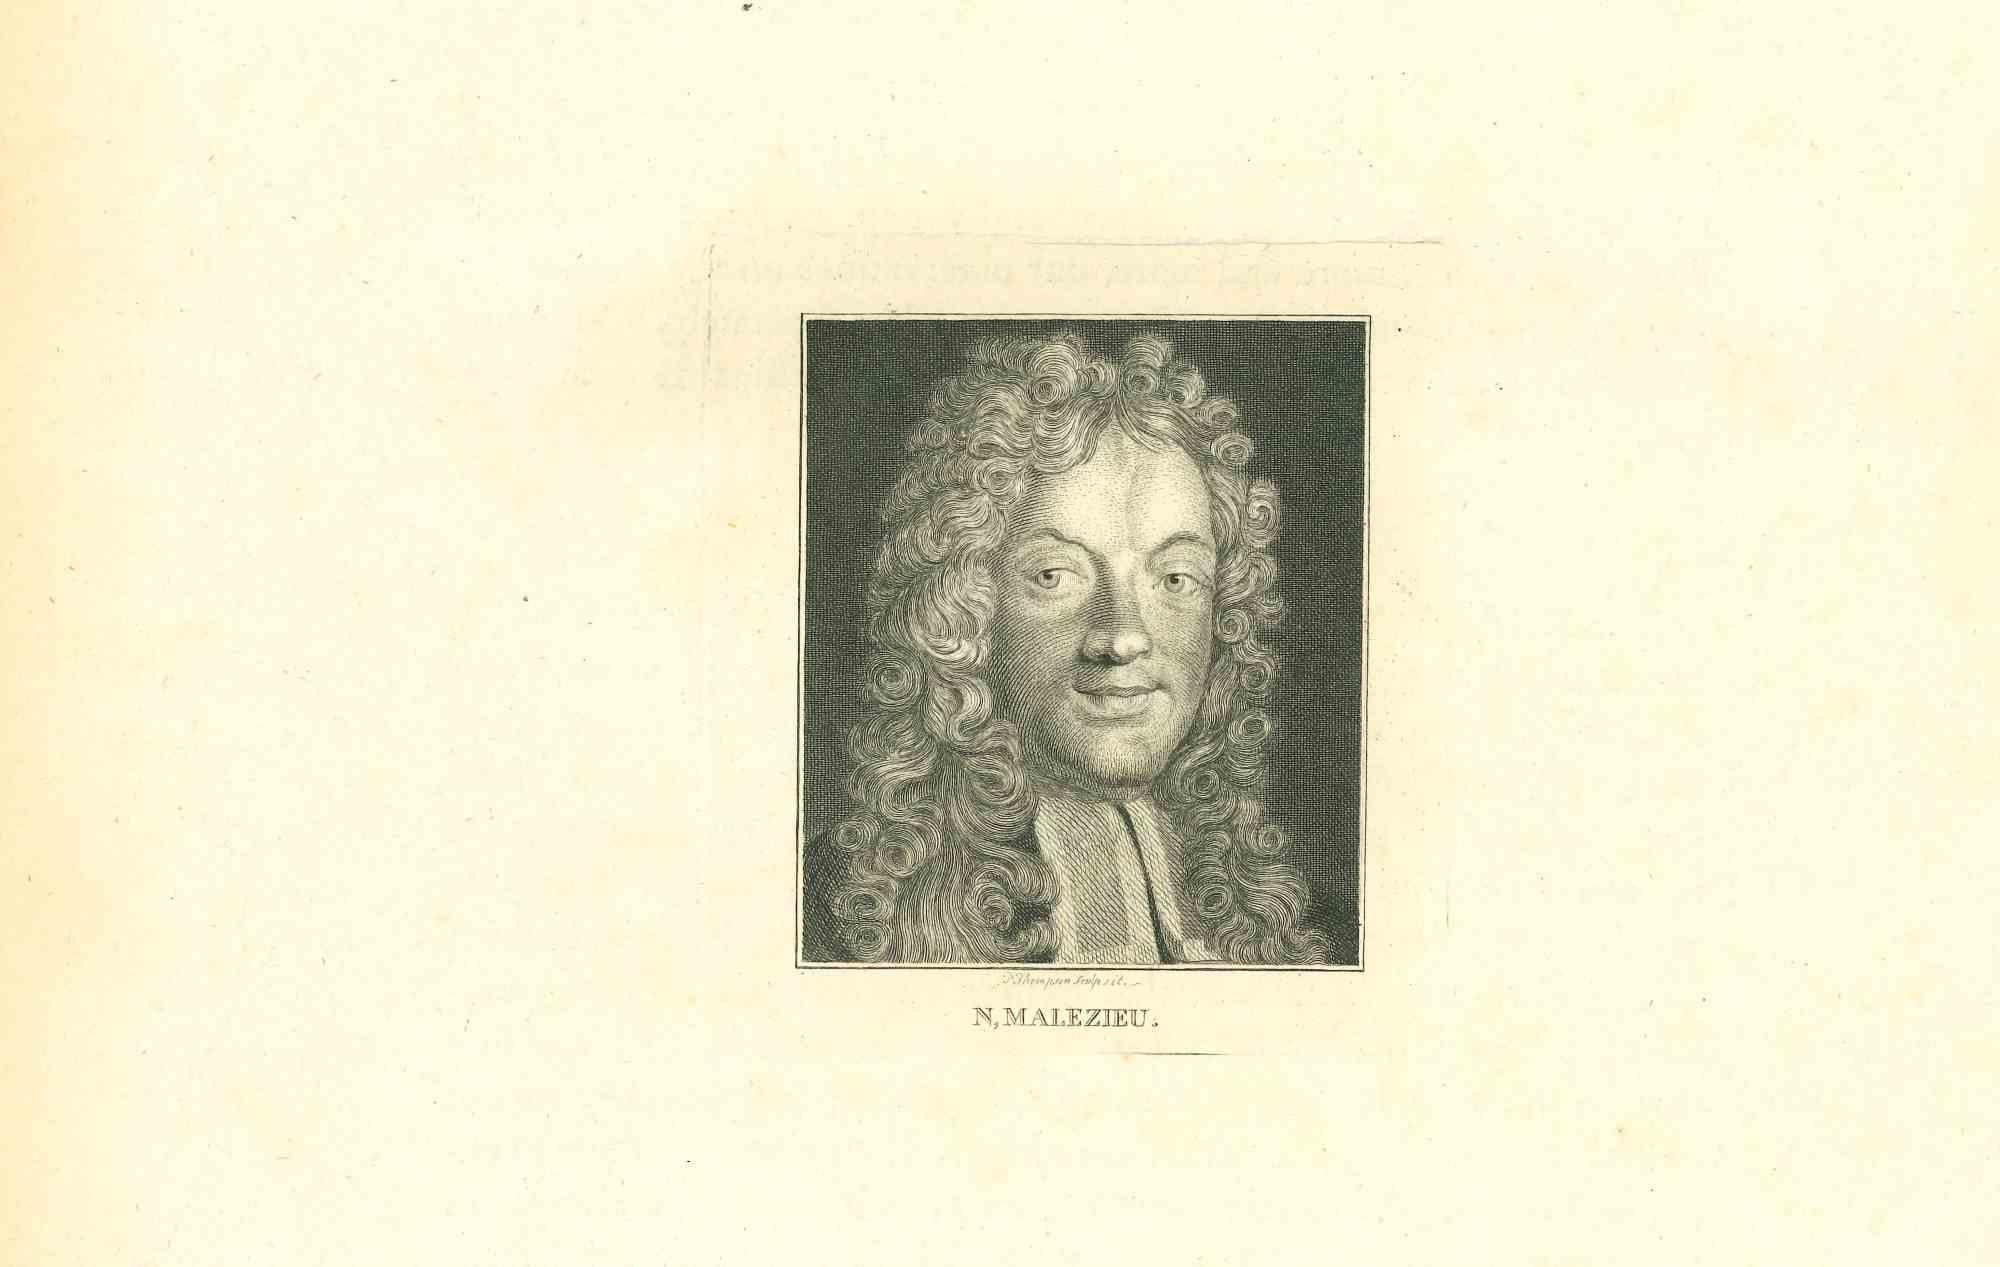 Portrait of Nicolas Malezieu is an original etching realized by Thomas Holloway for Johann Caspar Lavater's "Essays on Physiognomy, Designed to Promote the Knowledge and the Love of Mankind", London, Bensley, 1810. 

Engraved: N. Malezieu on the